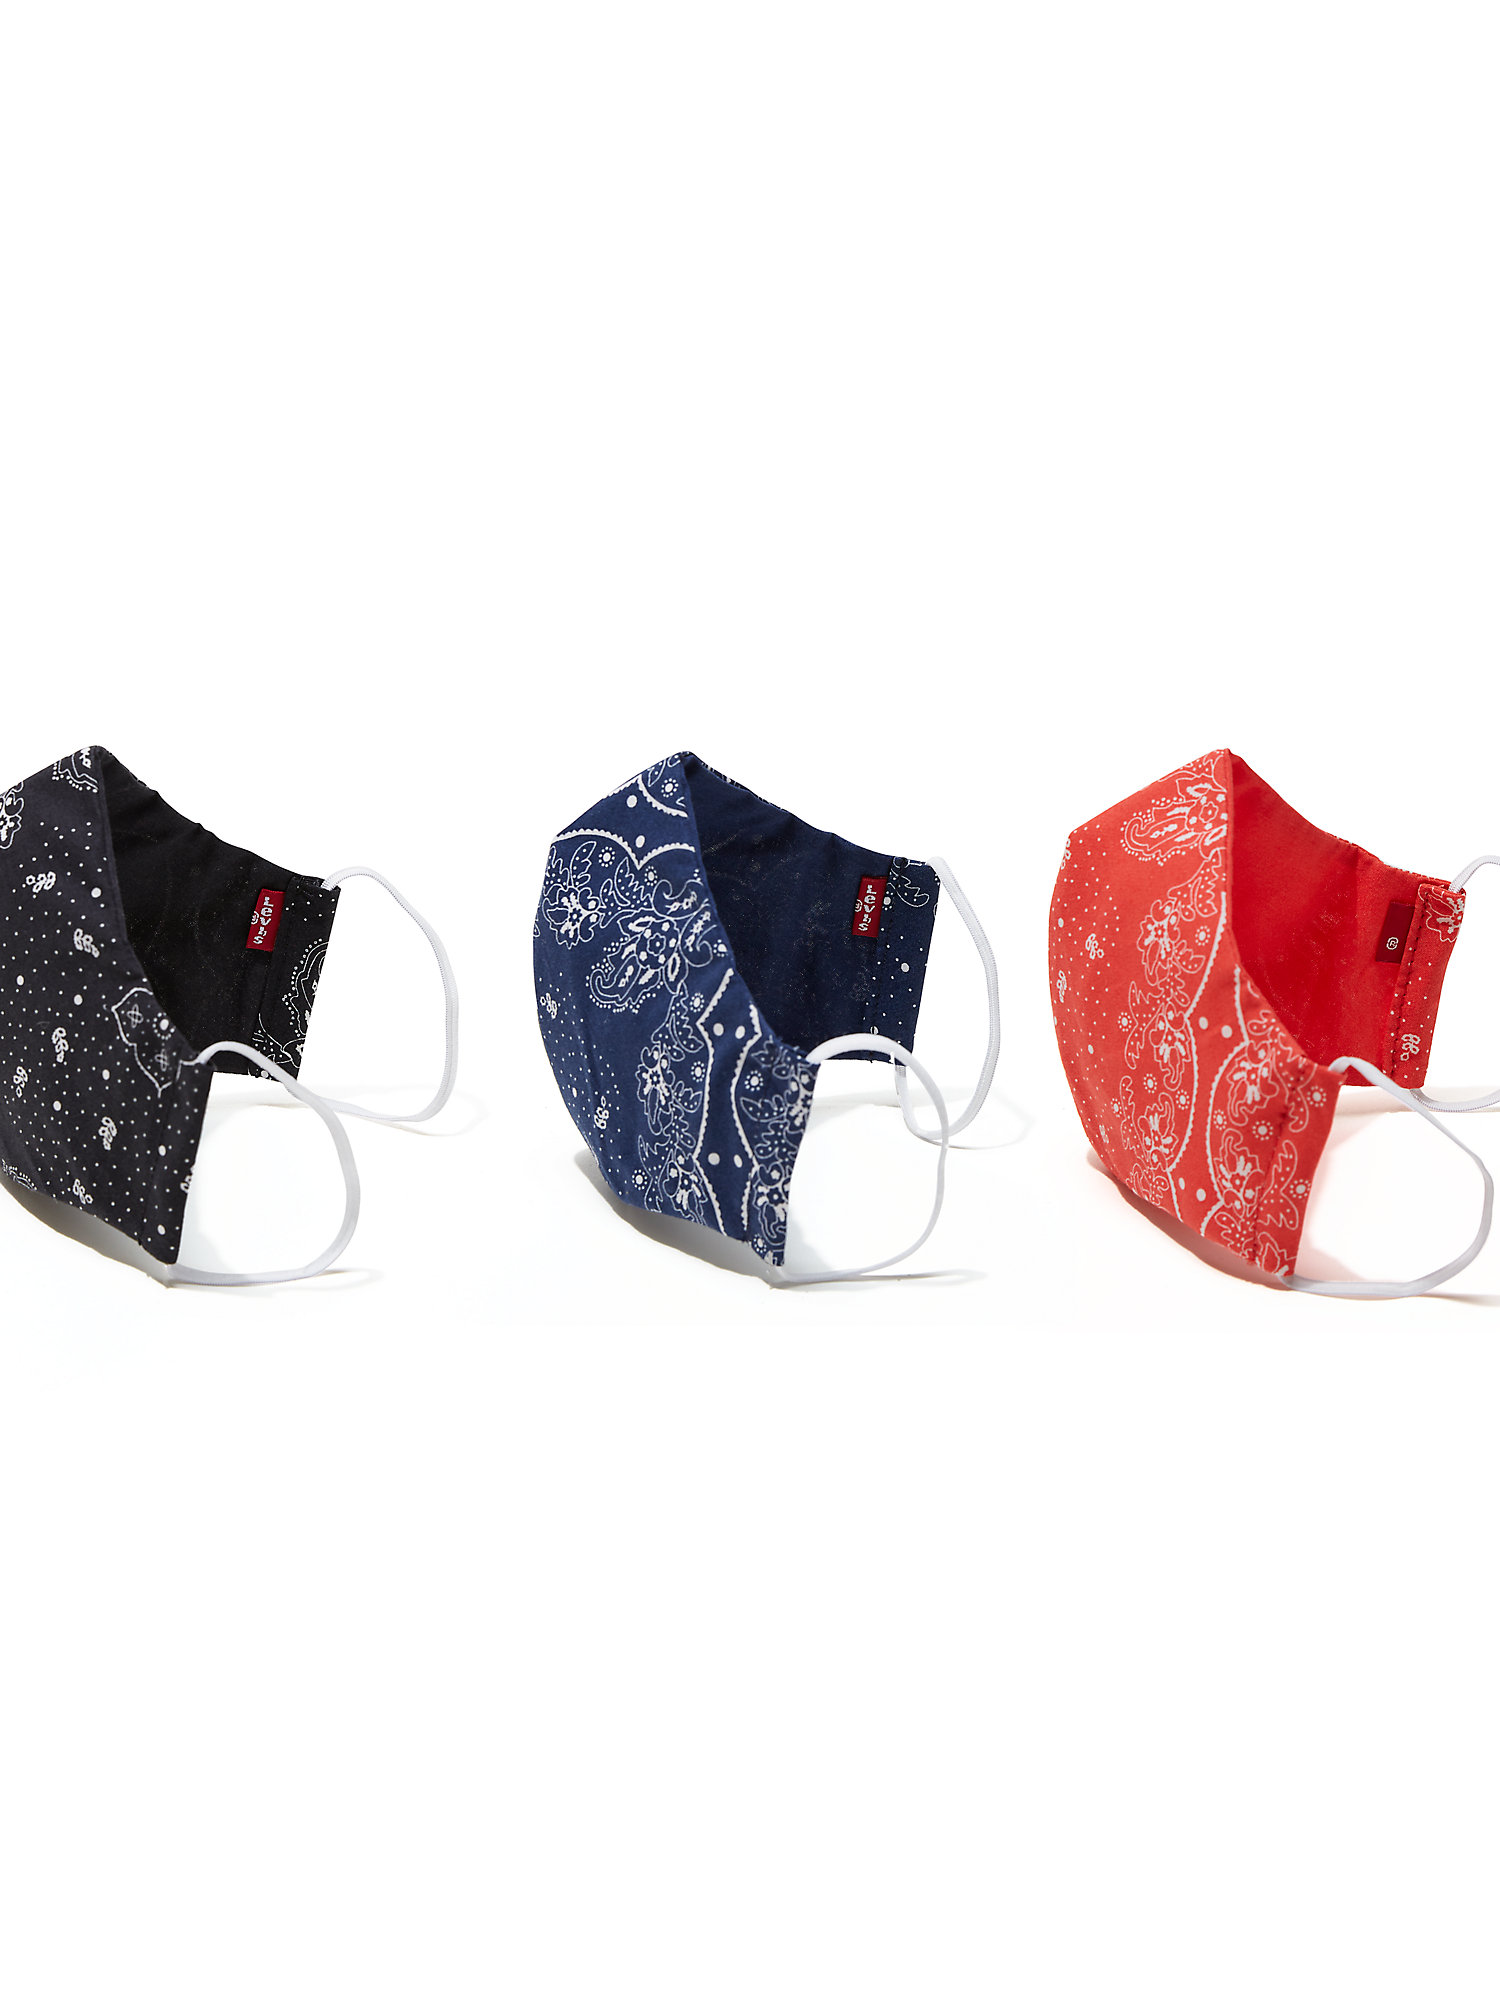 Levi's Reusable Print Face Mask (3 Pack) - image 1 of 4